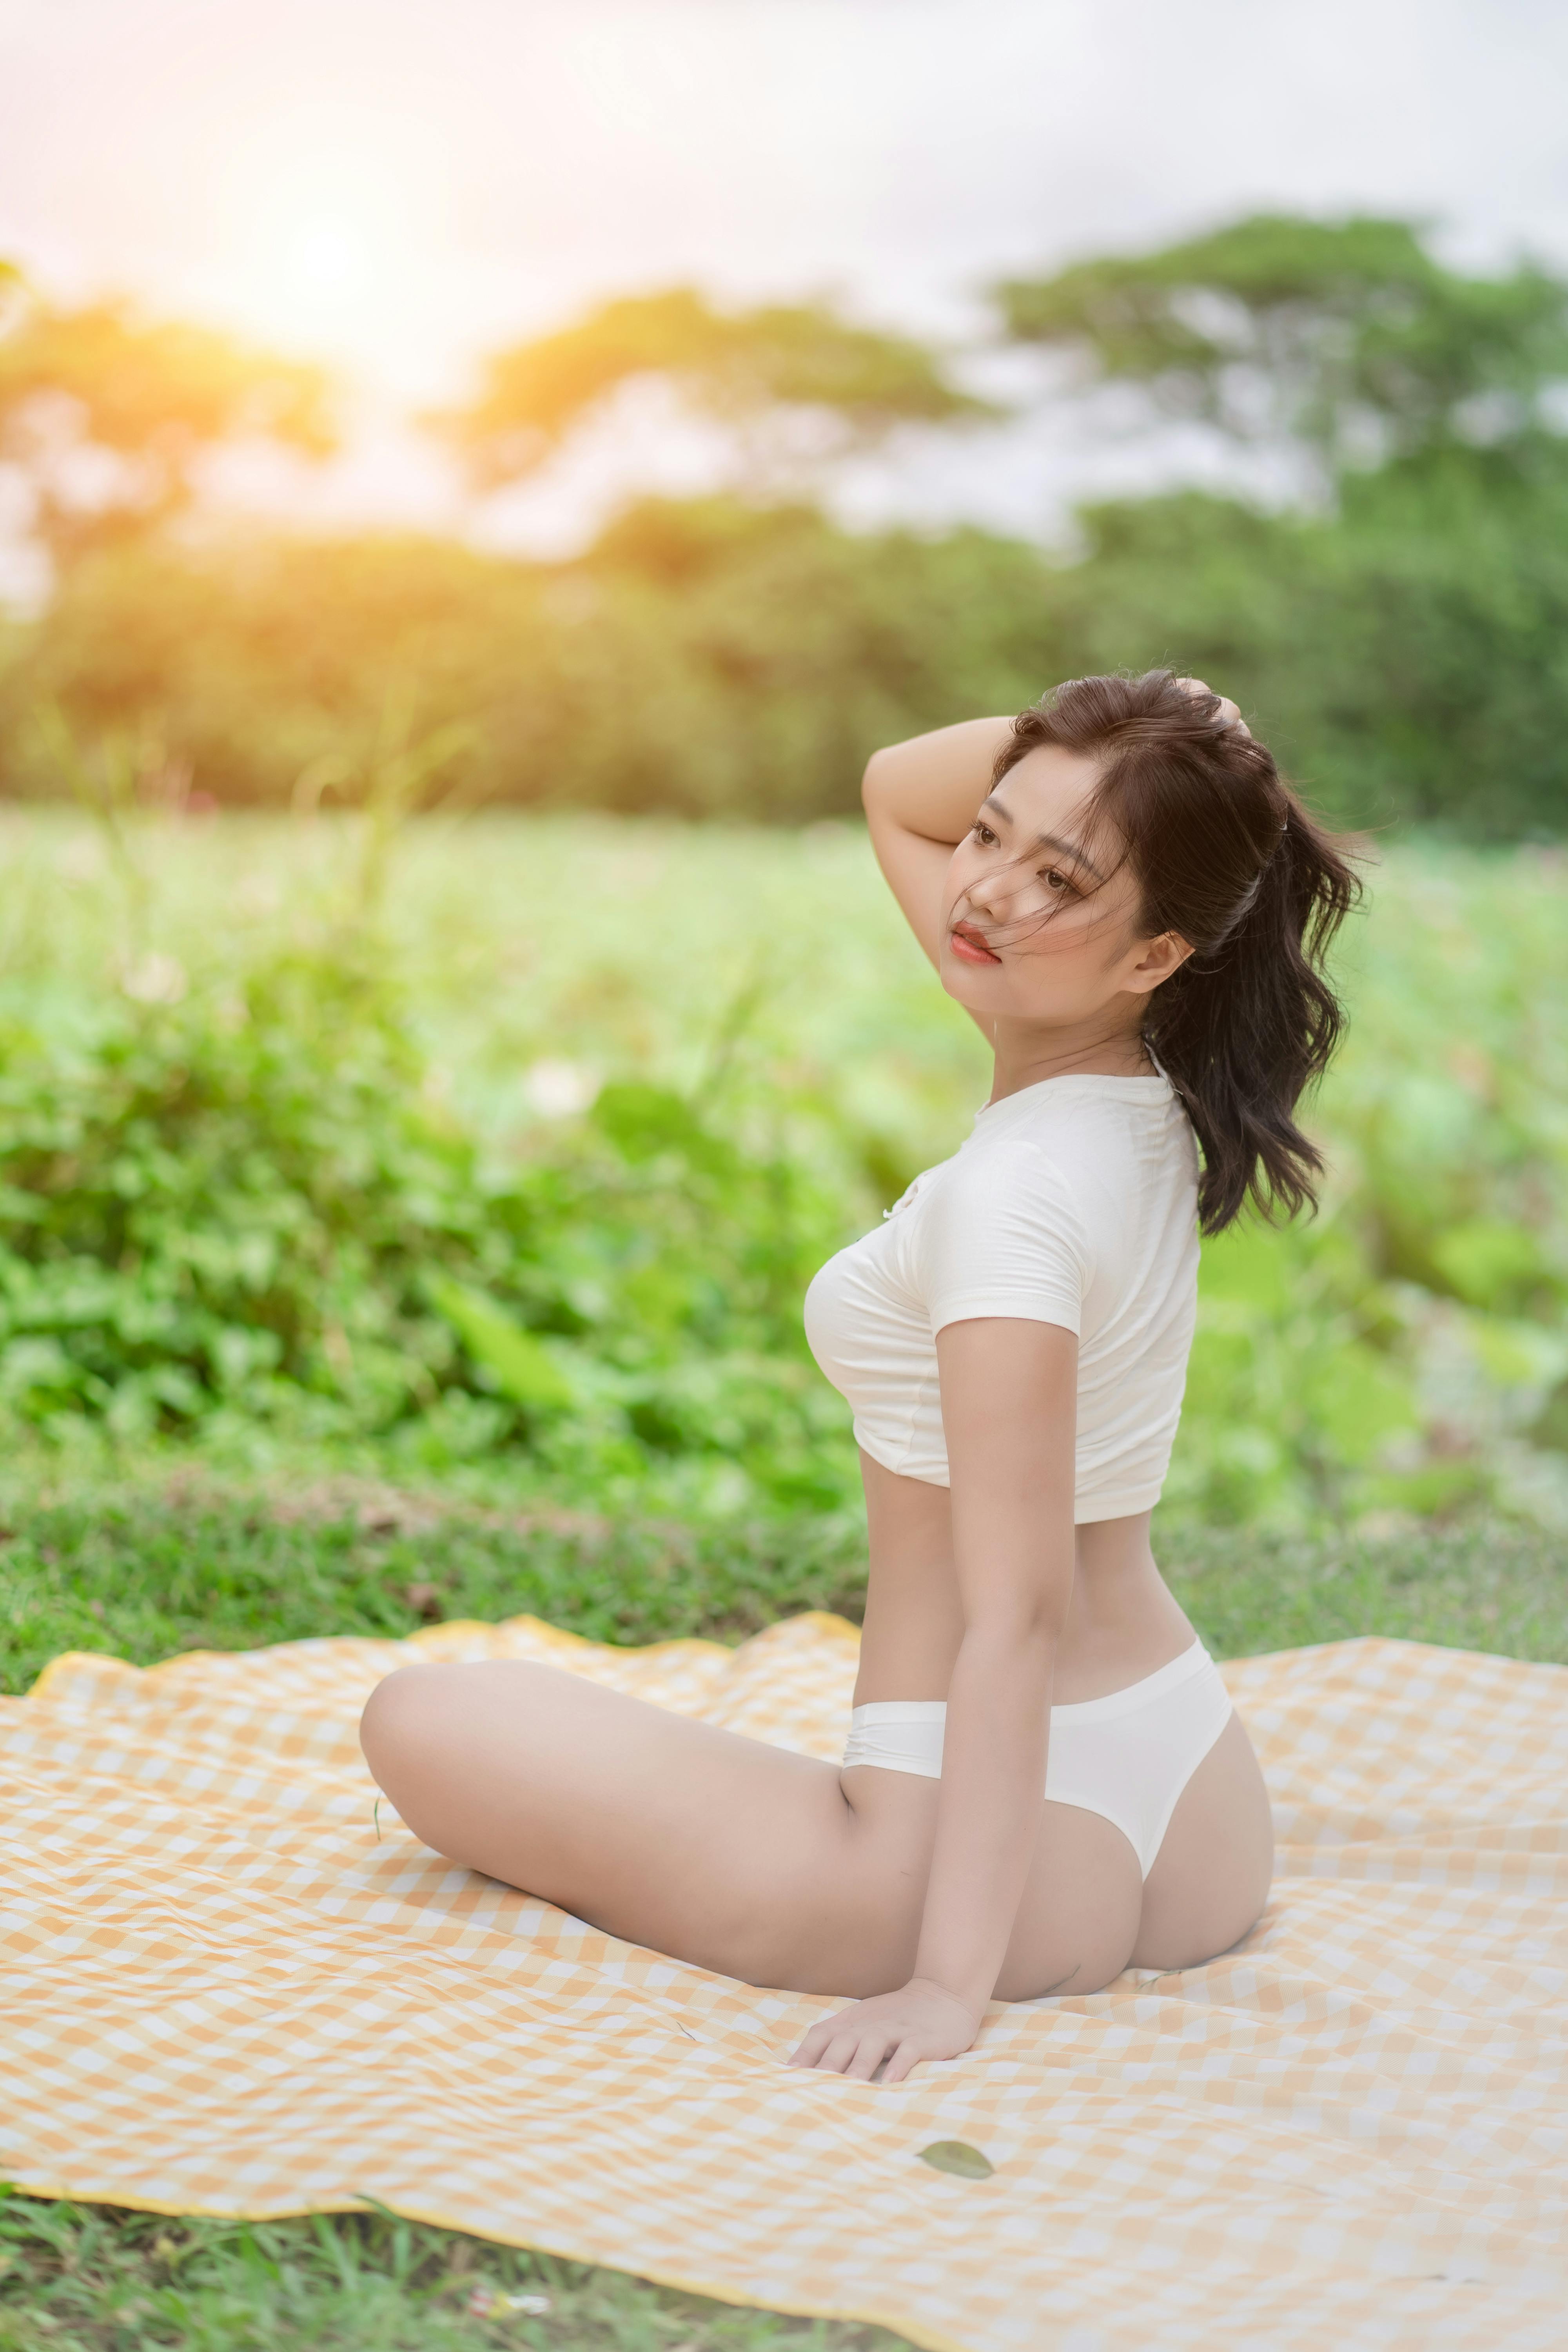 Sexy Woman in White Underwear Sitting on Picnic Blanket · Free Stock Photo